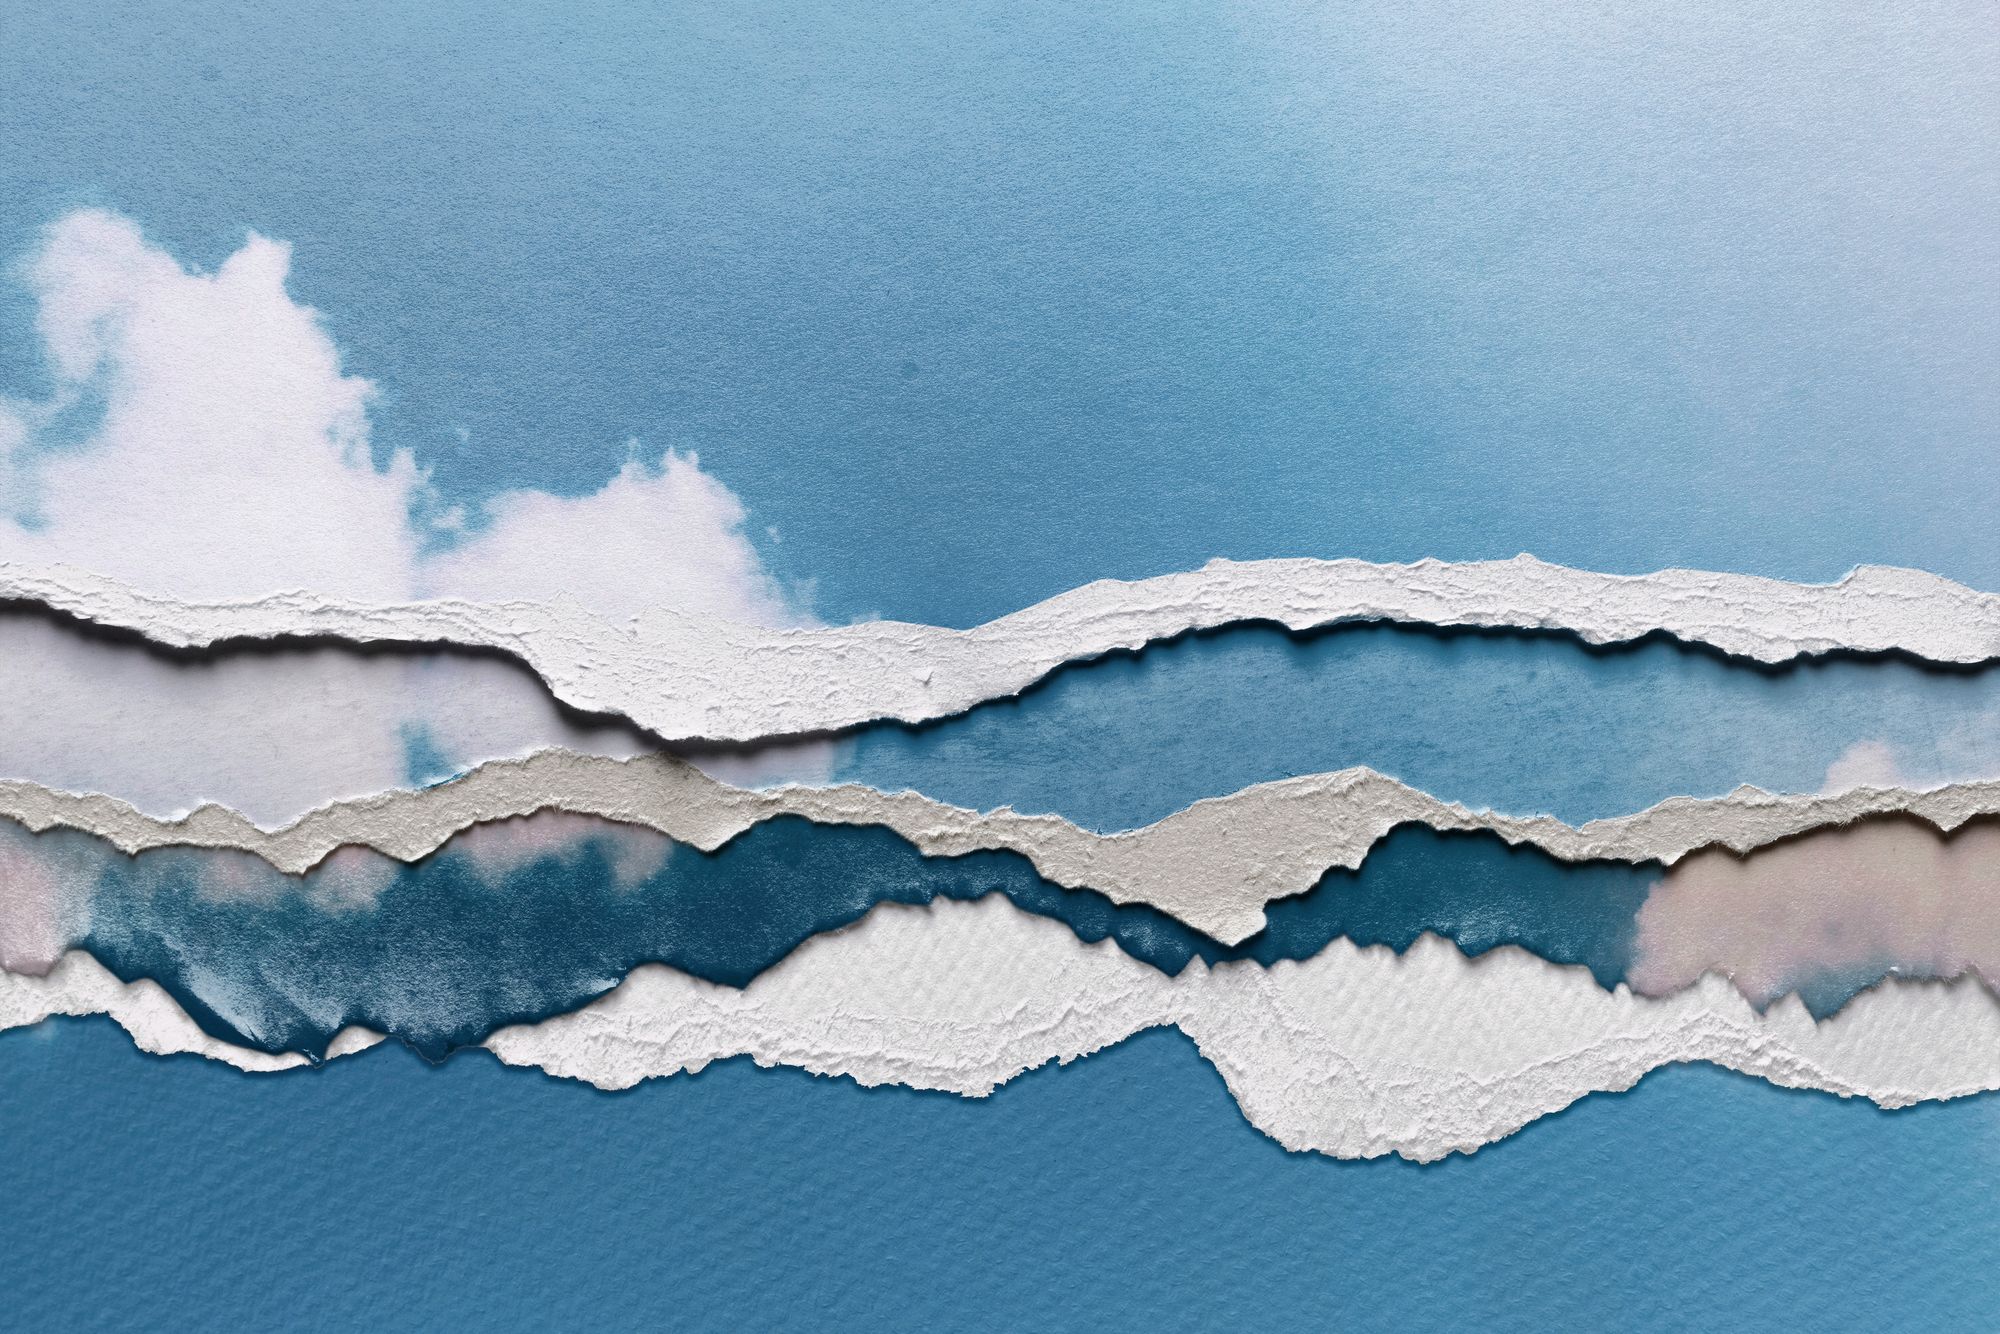 Torn pieces of paper depicting white clouds on a blue sky, one of top of the other.